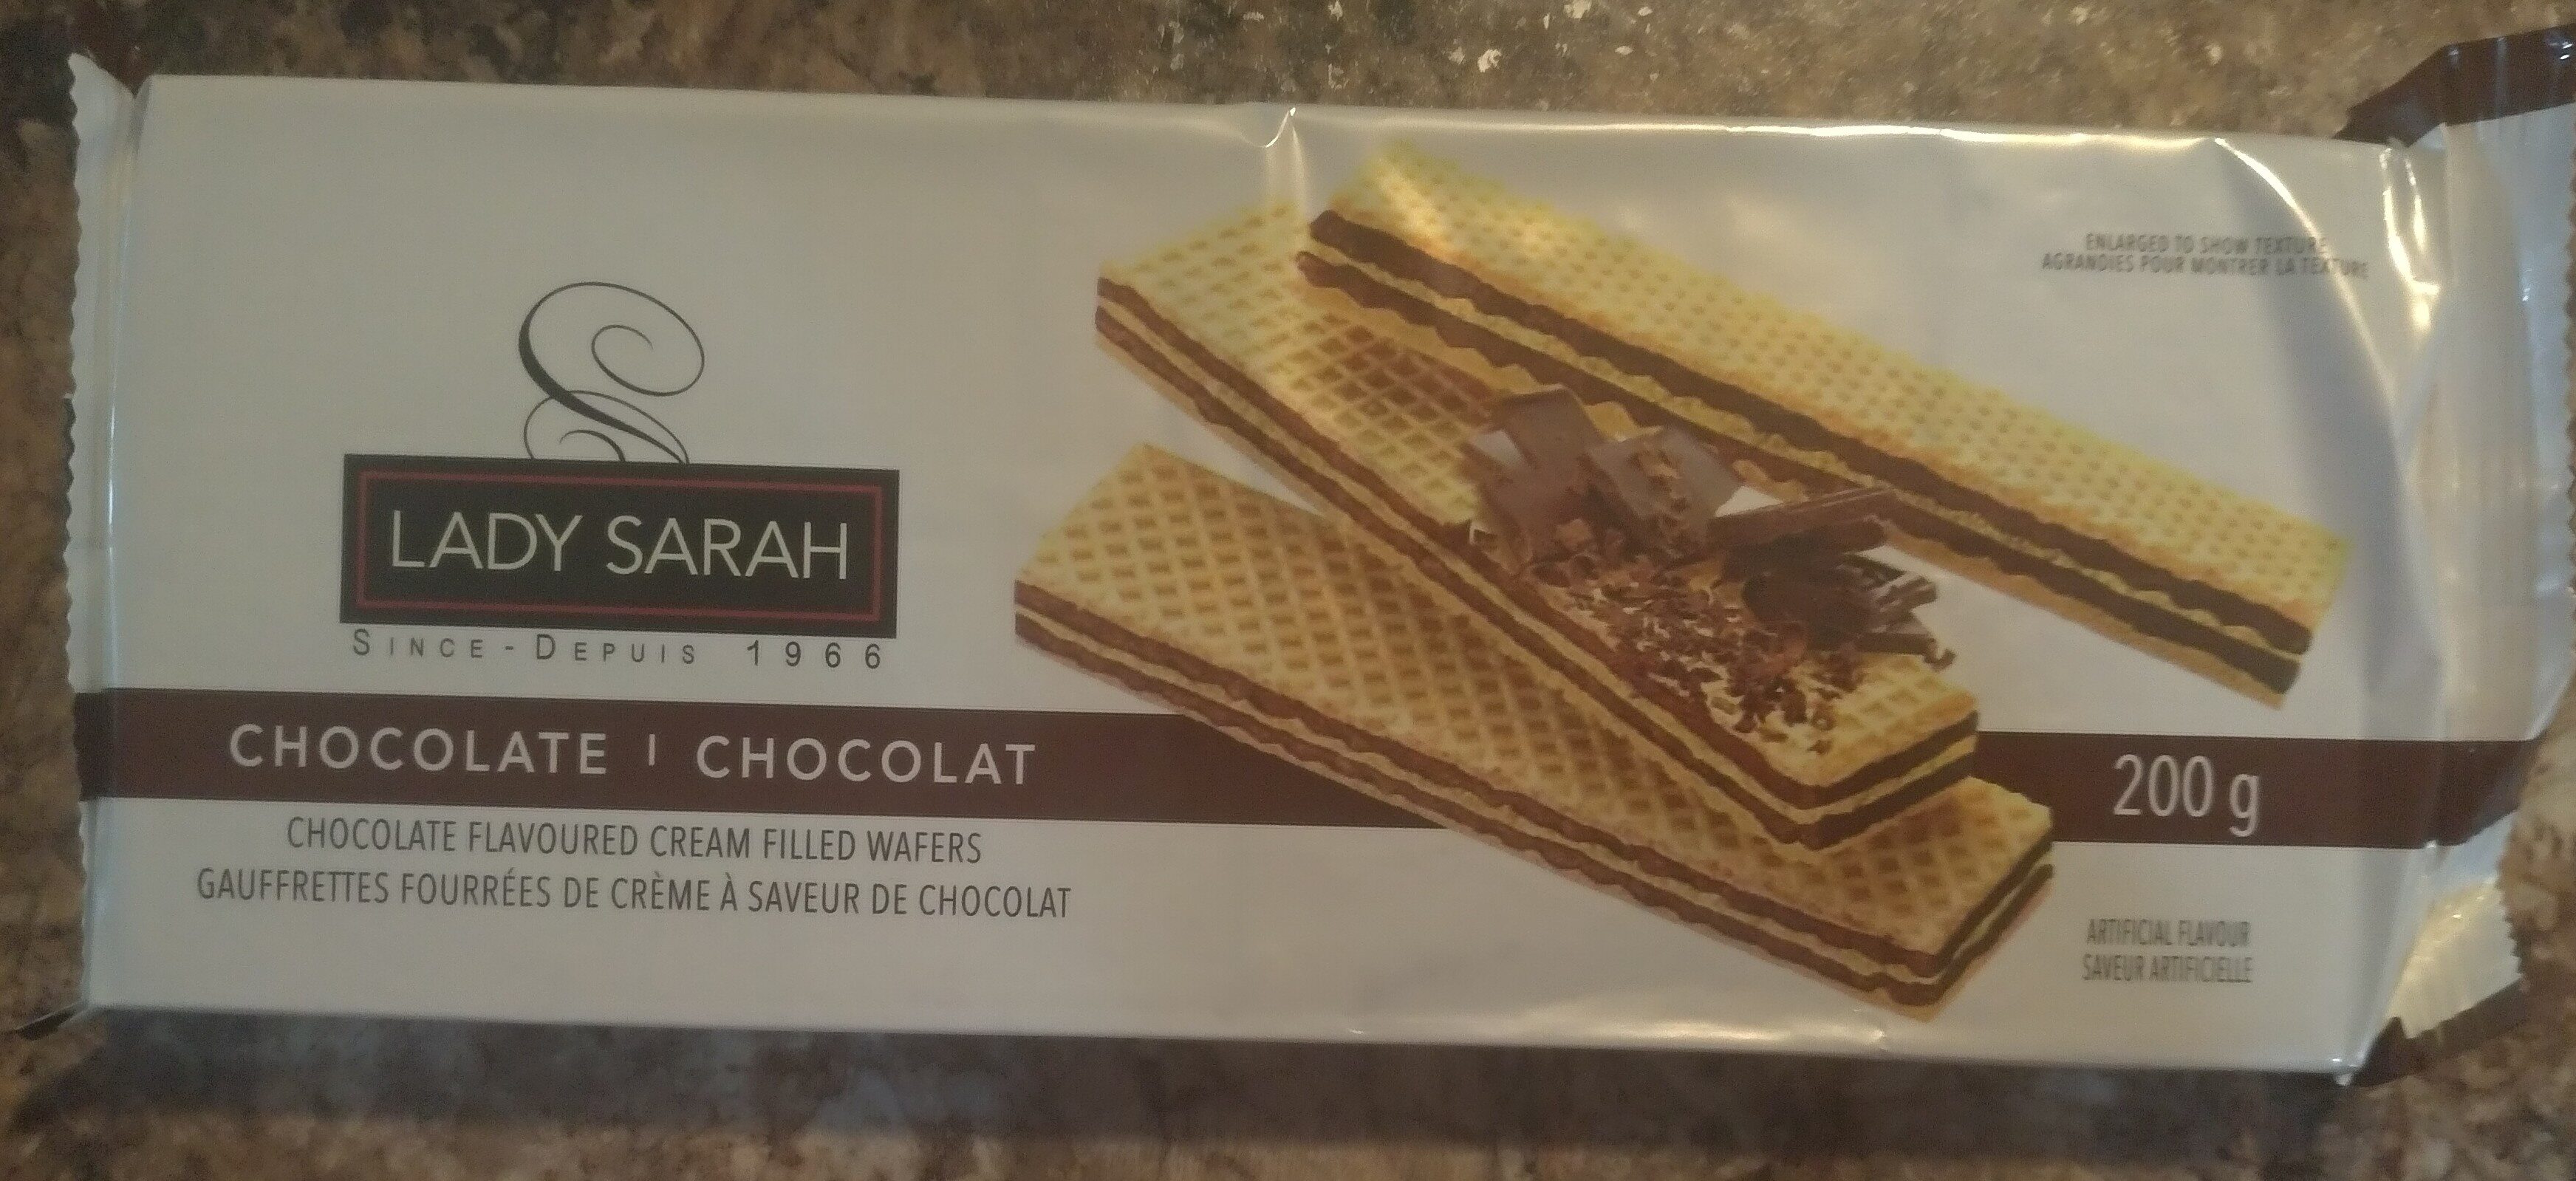 Chocolate Flavoured Cream Filled Wafers - Produit